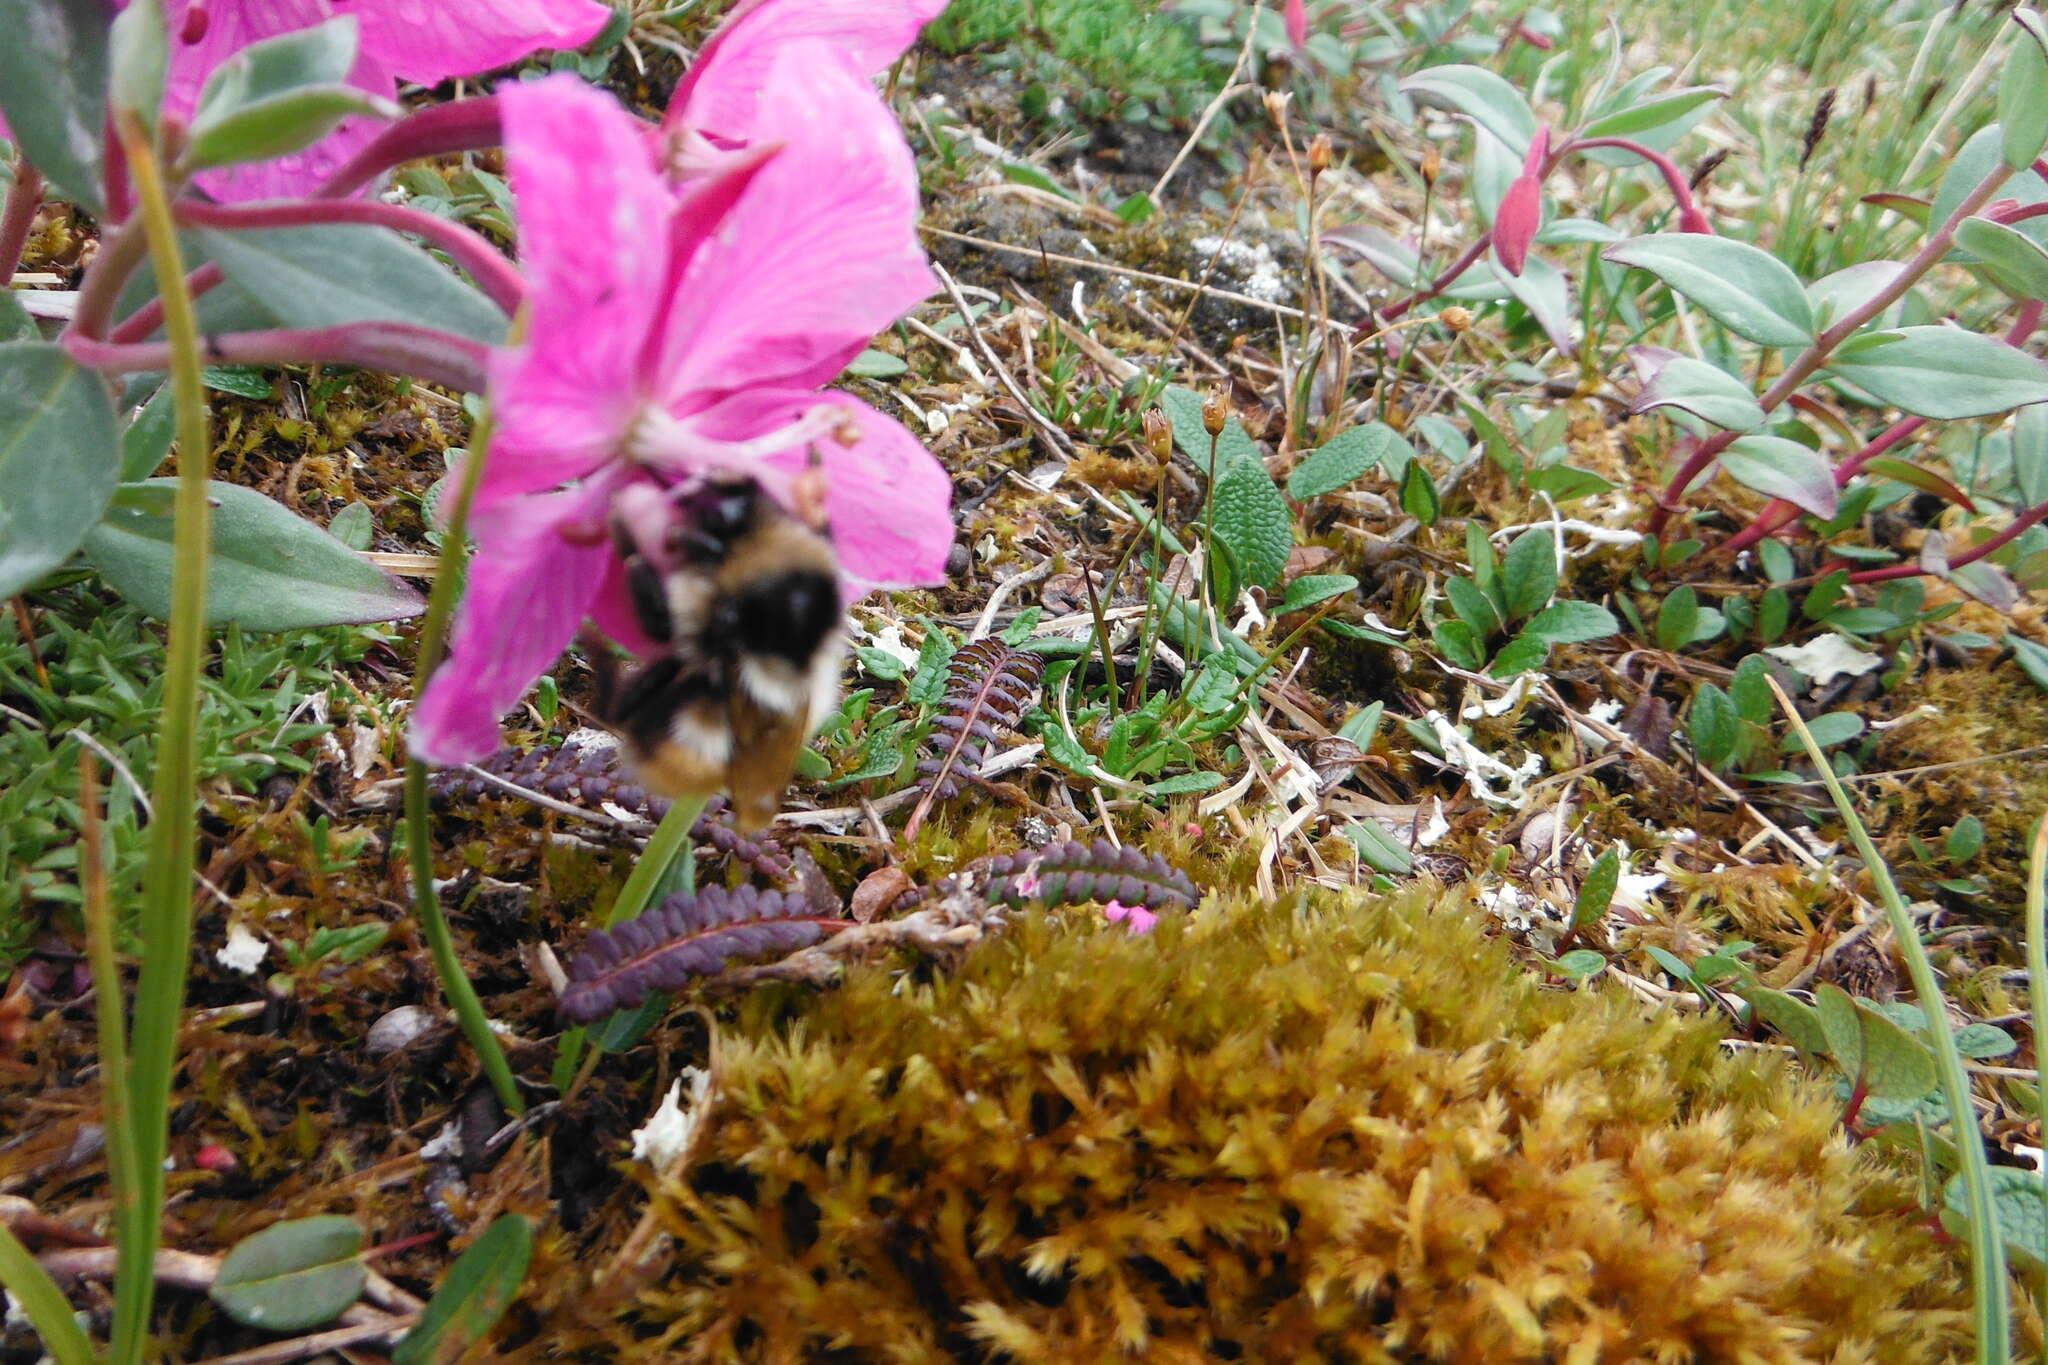 Image of Forest Bumble Bee